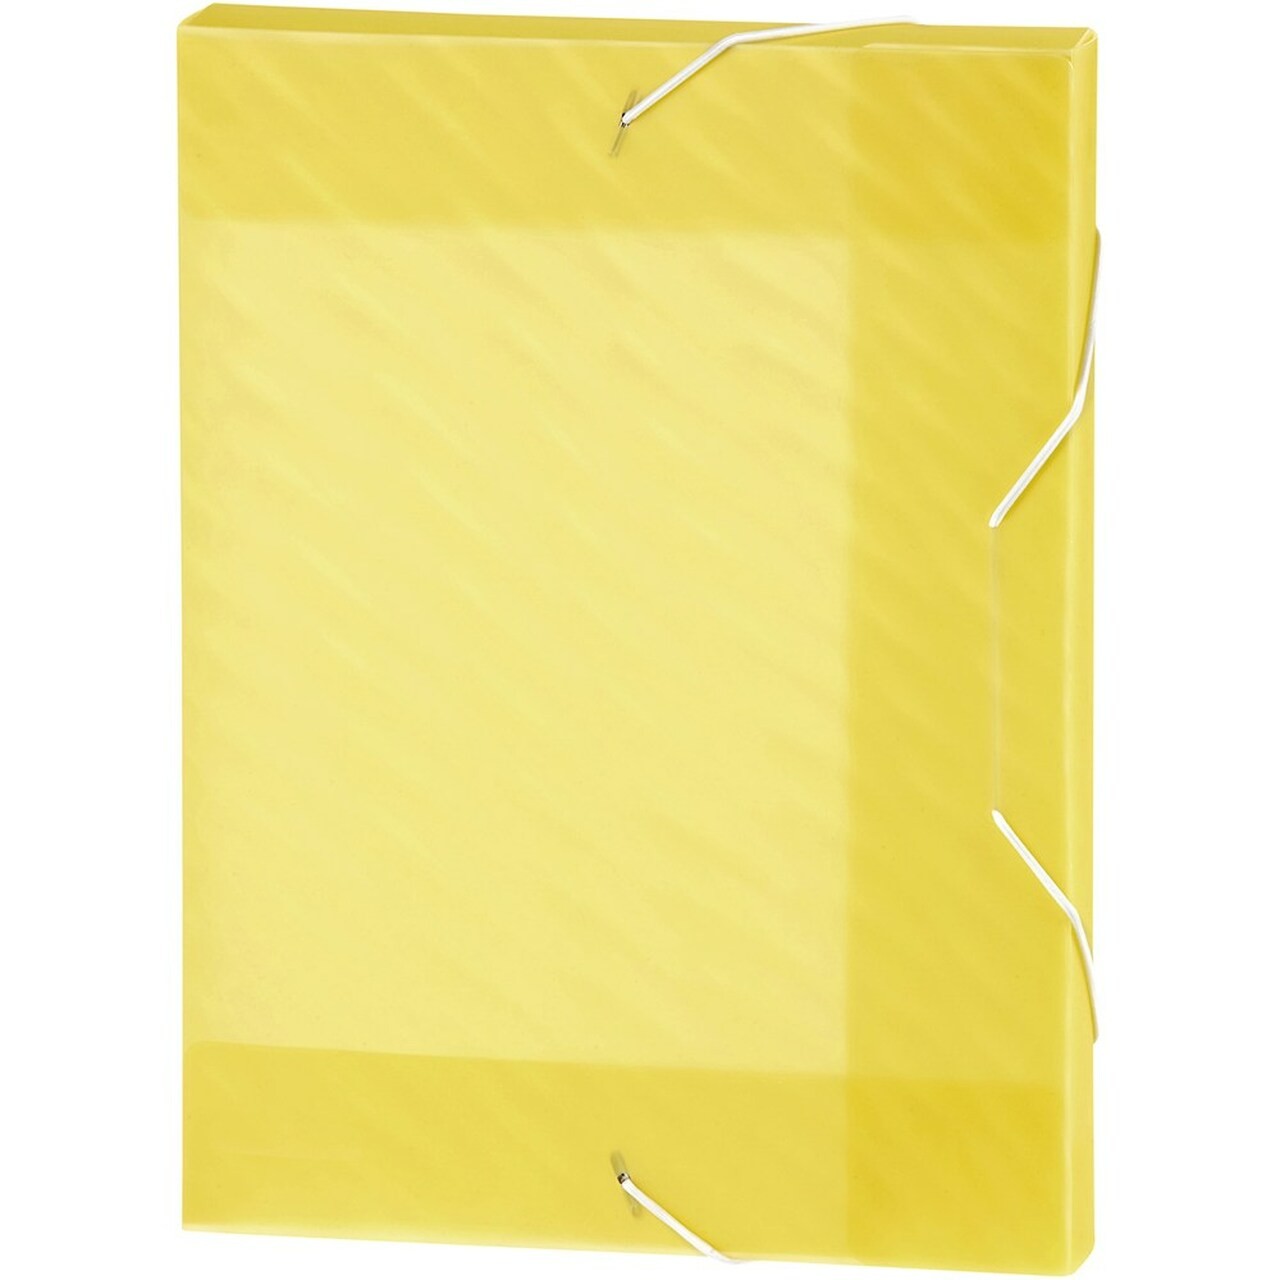 Elastic BoxFile PVC 50mm Spine - ( SOLID - YELLOW )